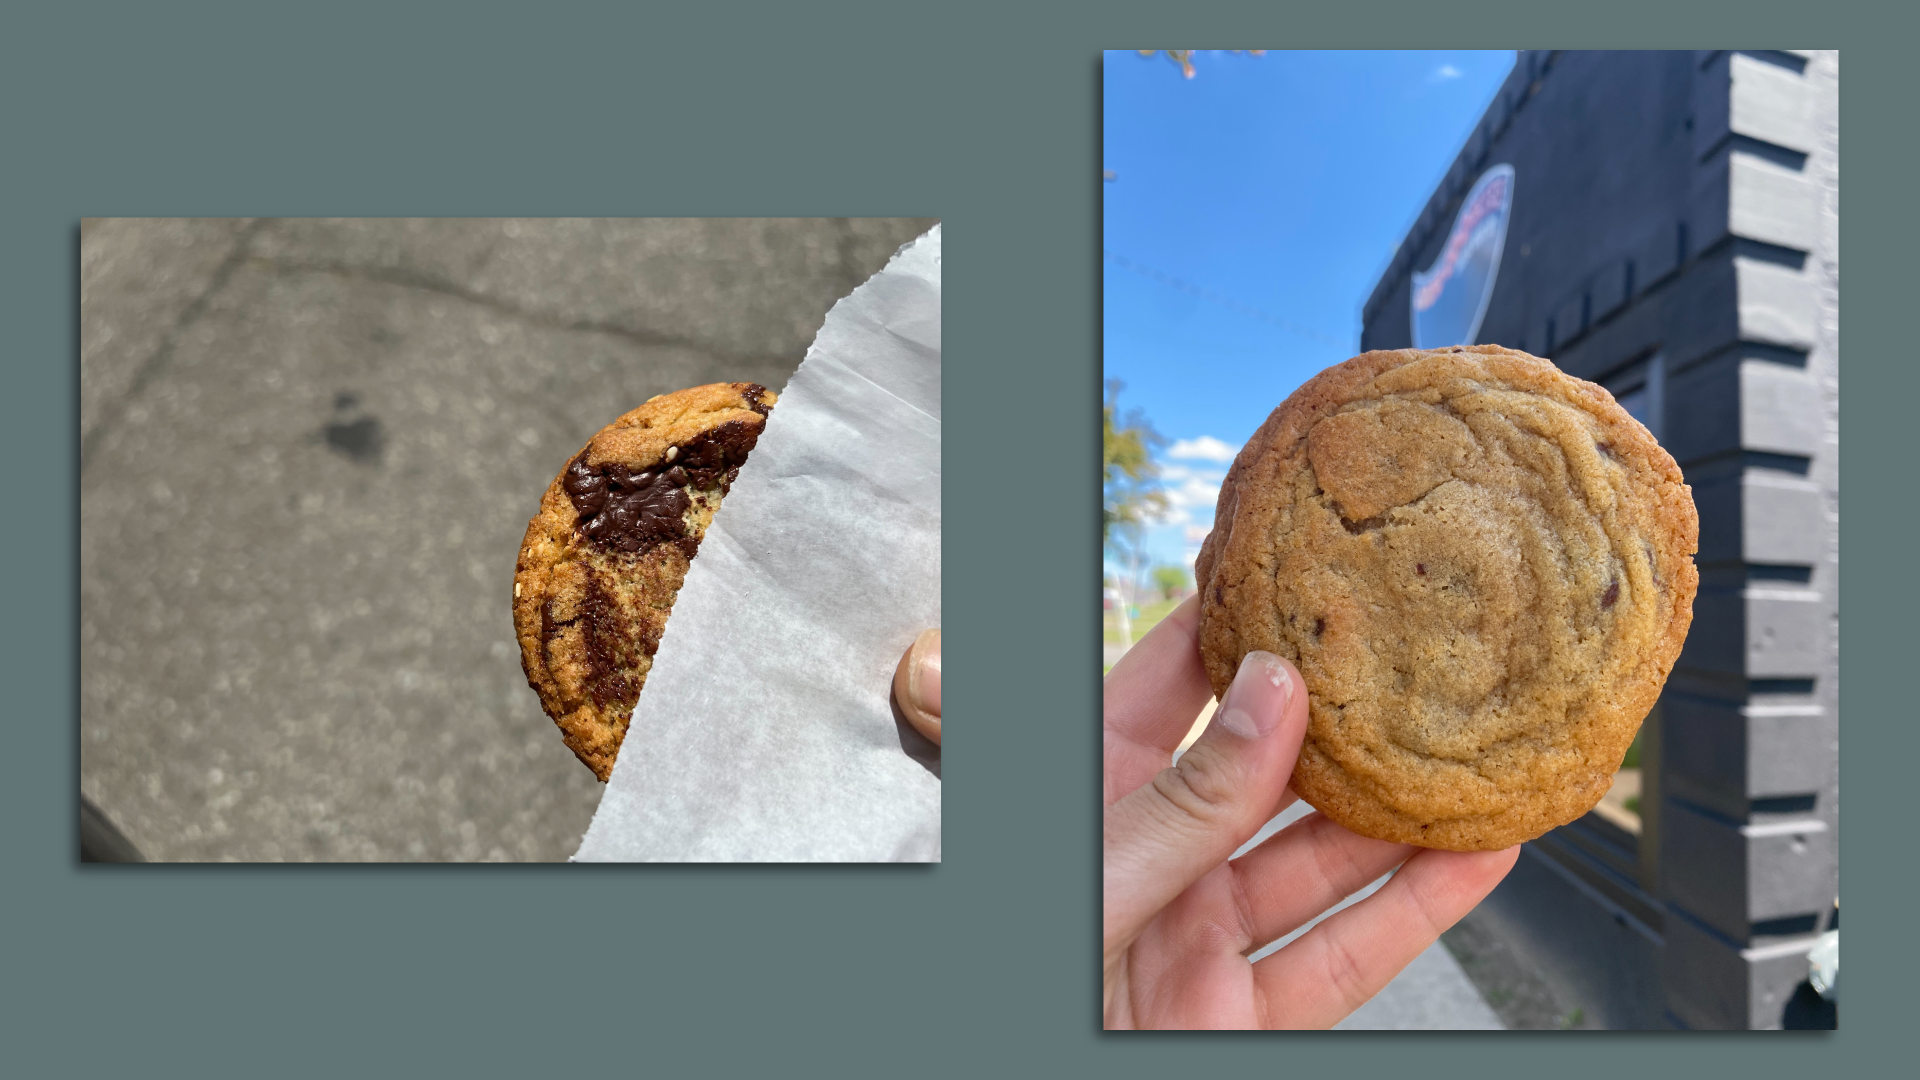 Two chocolate chip cookies are shown in separate images.